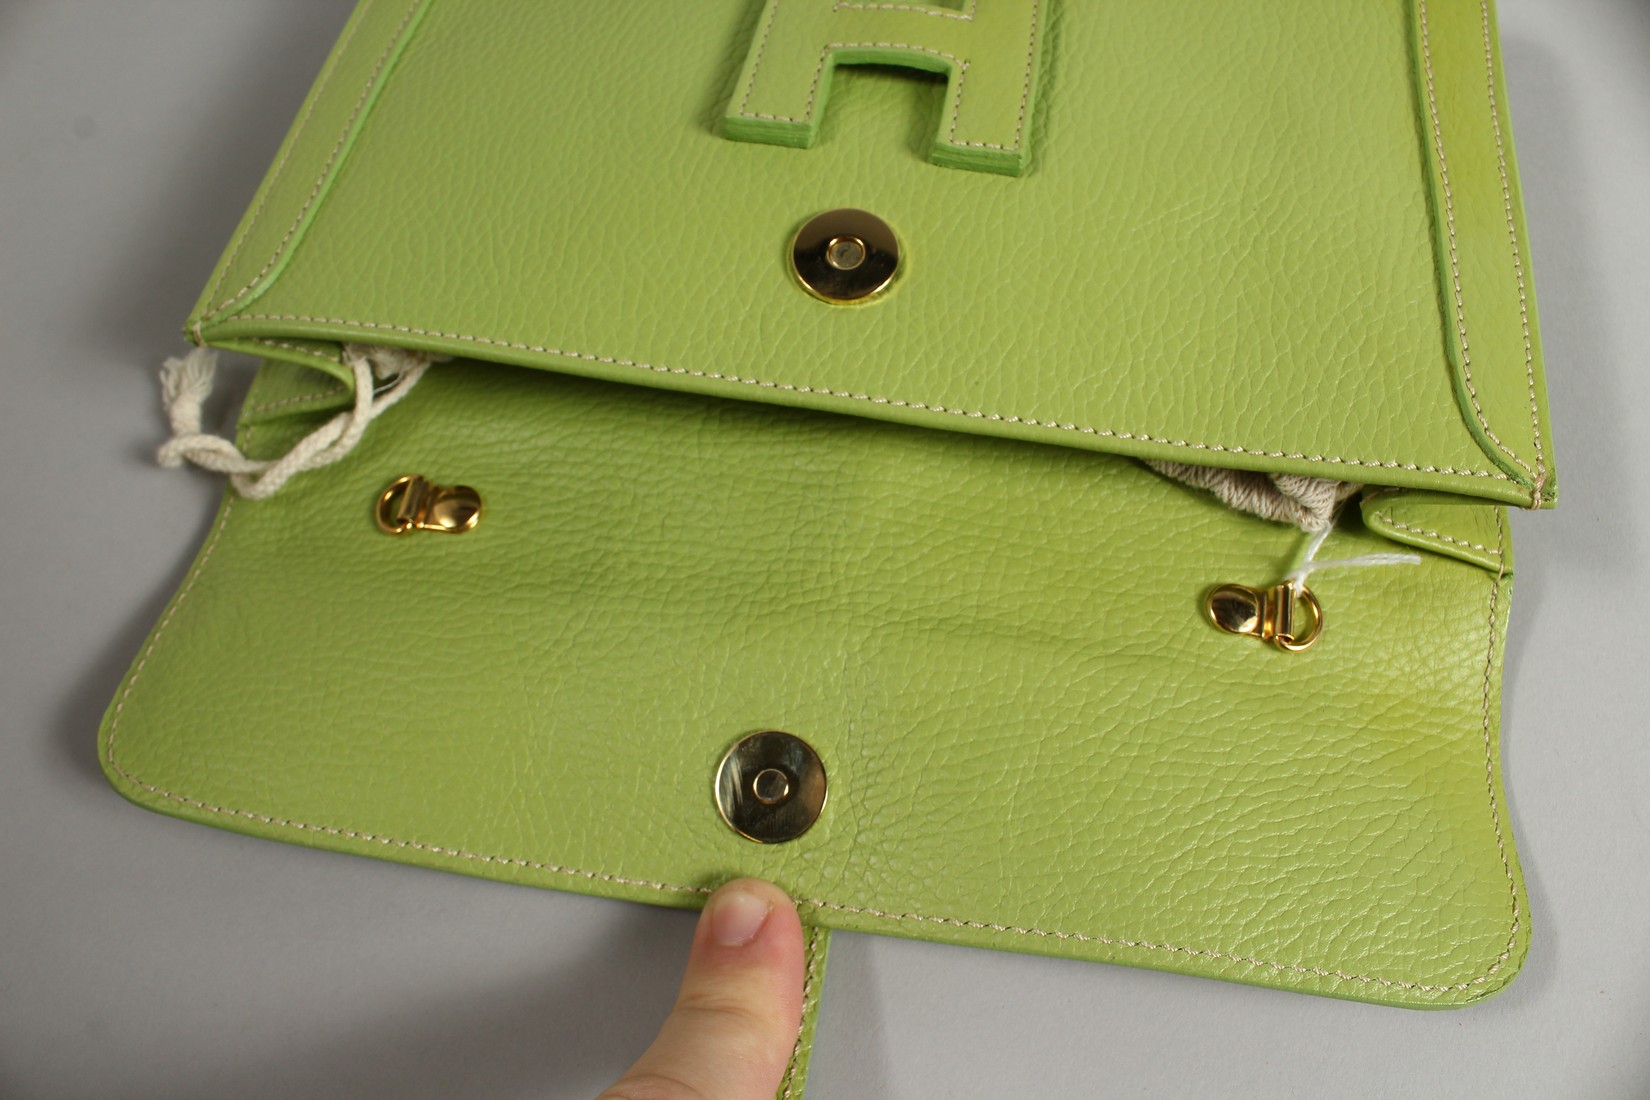 A GREEN LEATHER CLUTCH BAG and strap. 24cm long x 17cm high. - Image 6 of 6